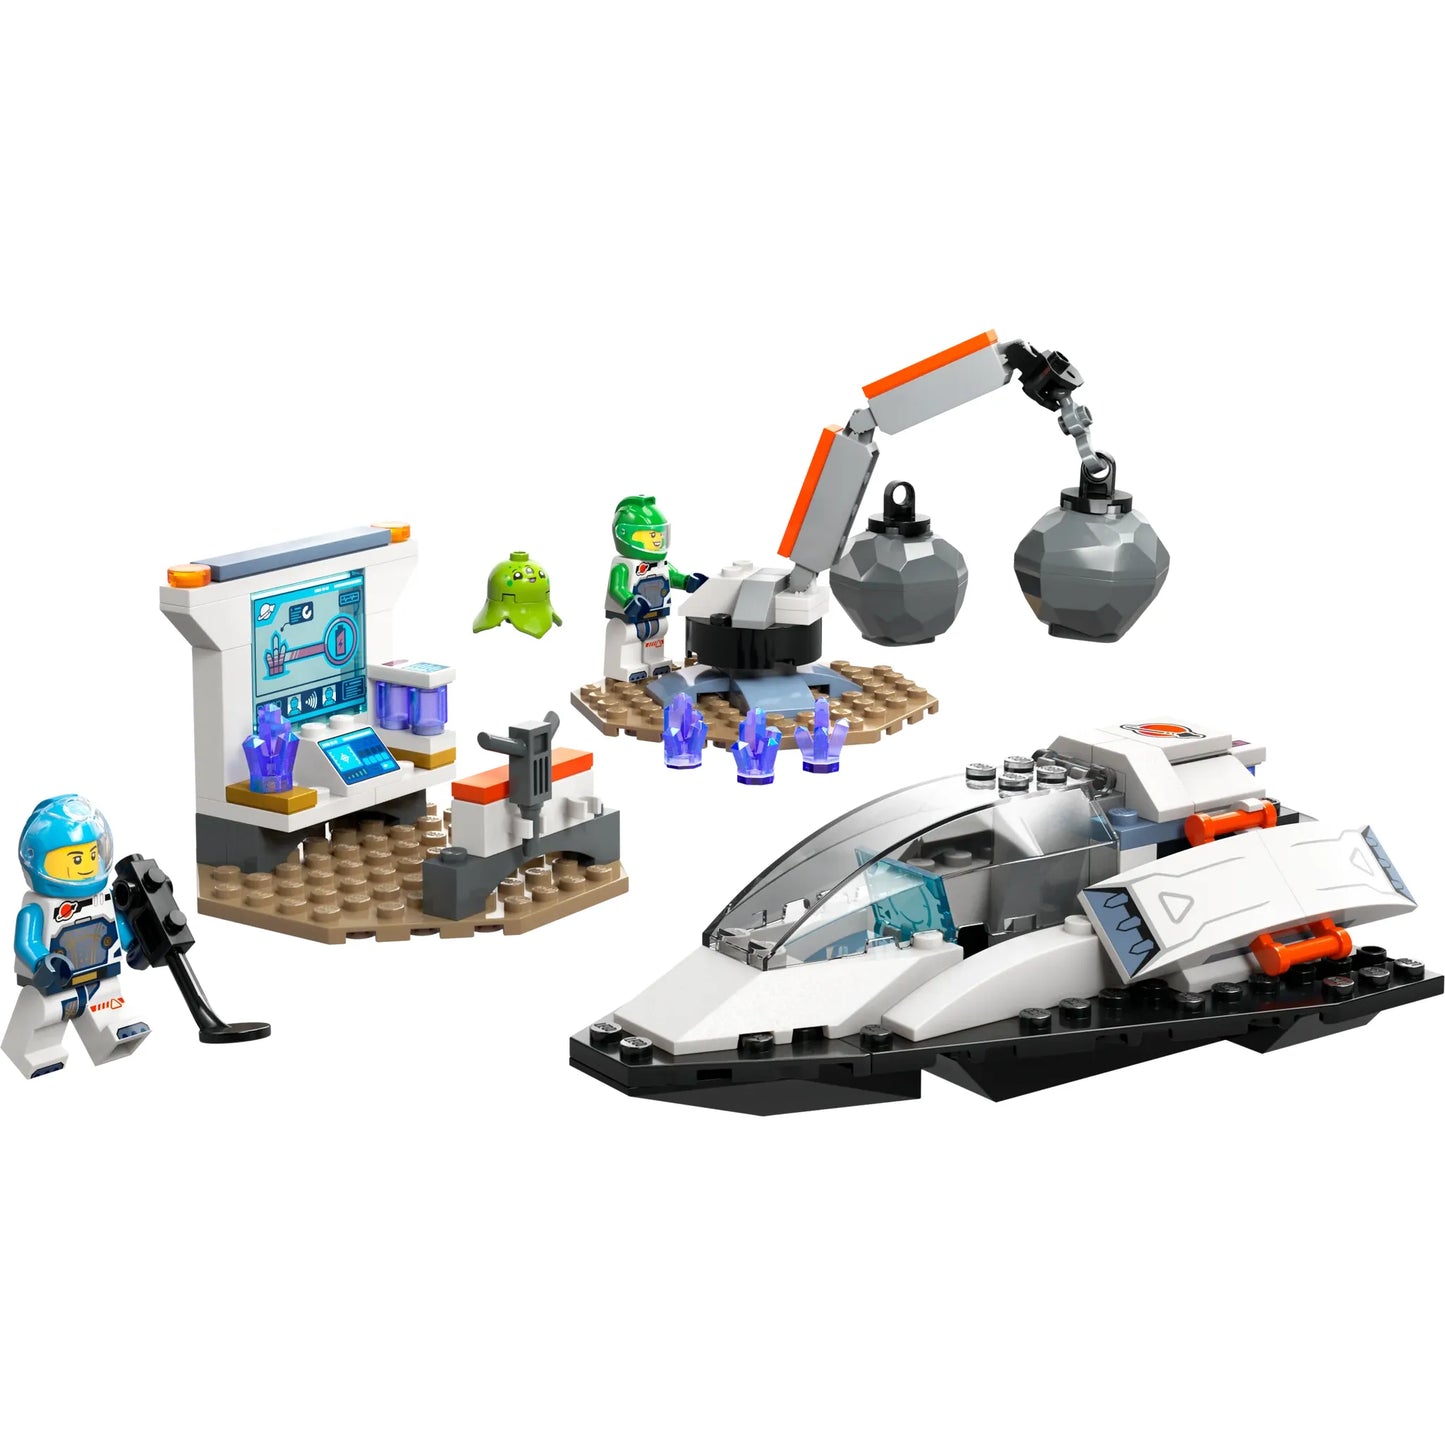 City Space: Spaceship and Asteroid Discovery Building Set